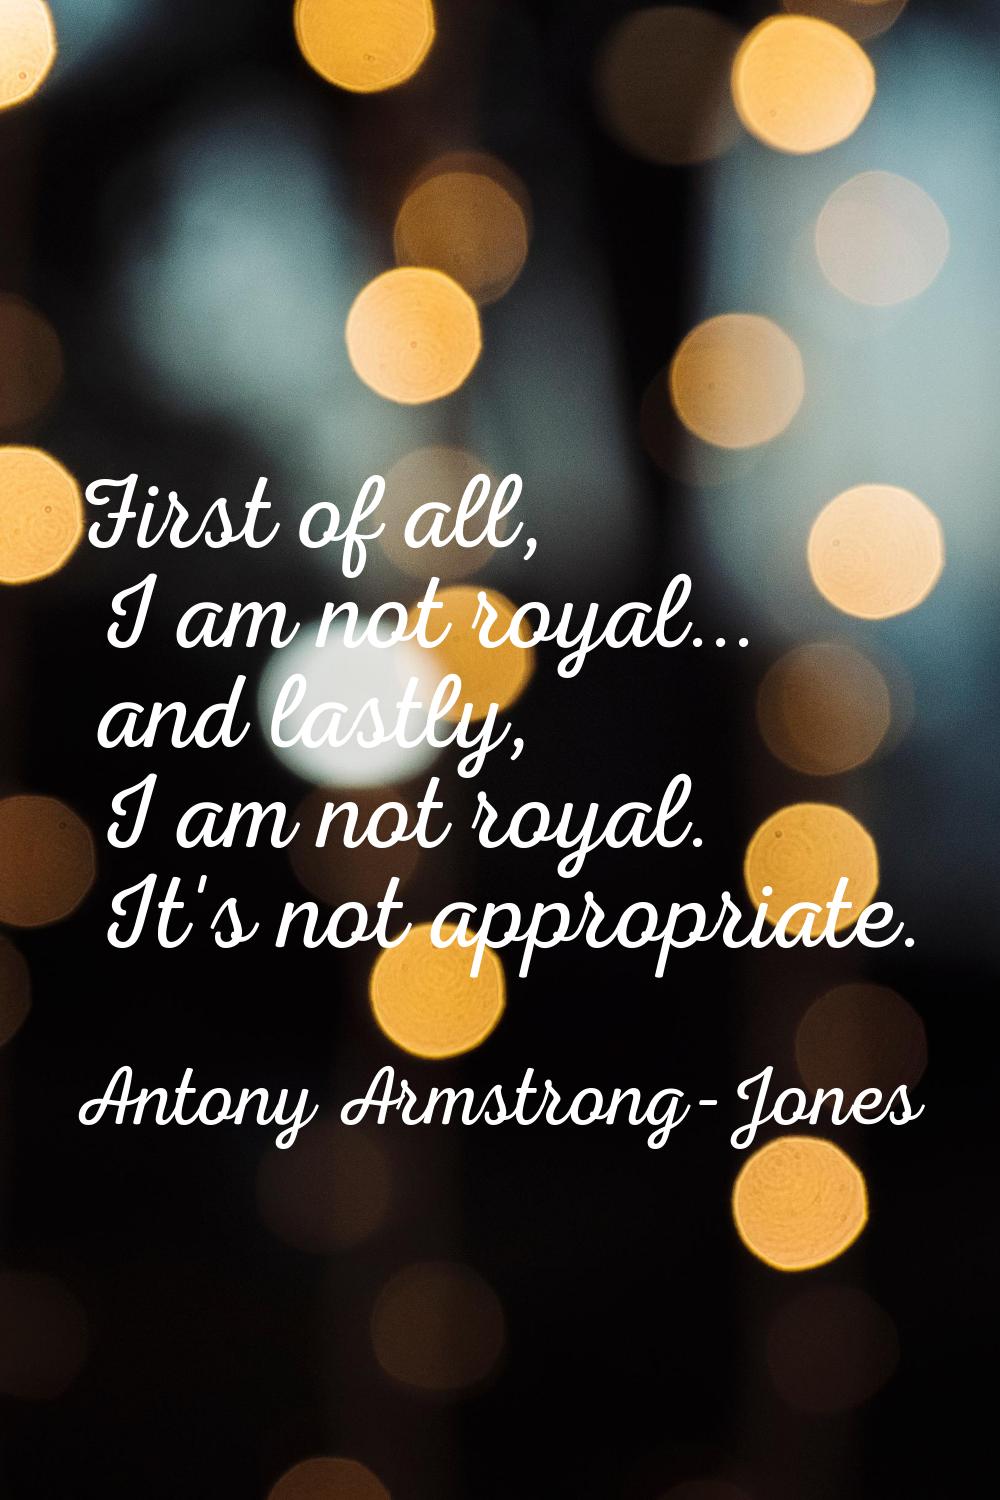 First of all, I am not royal... and lastly, I am not royal. It's not appropriate.